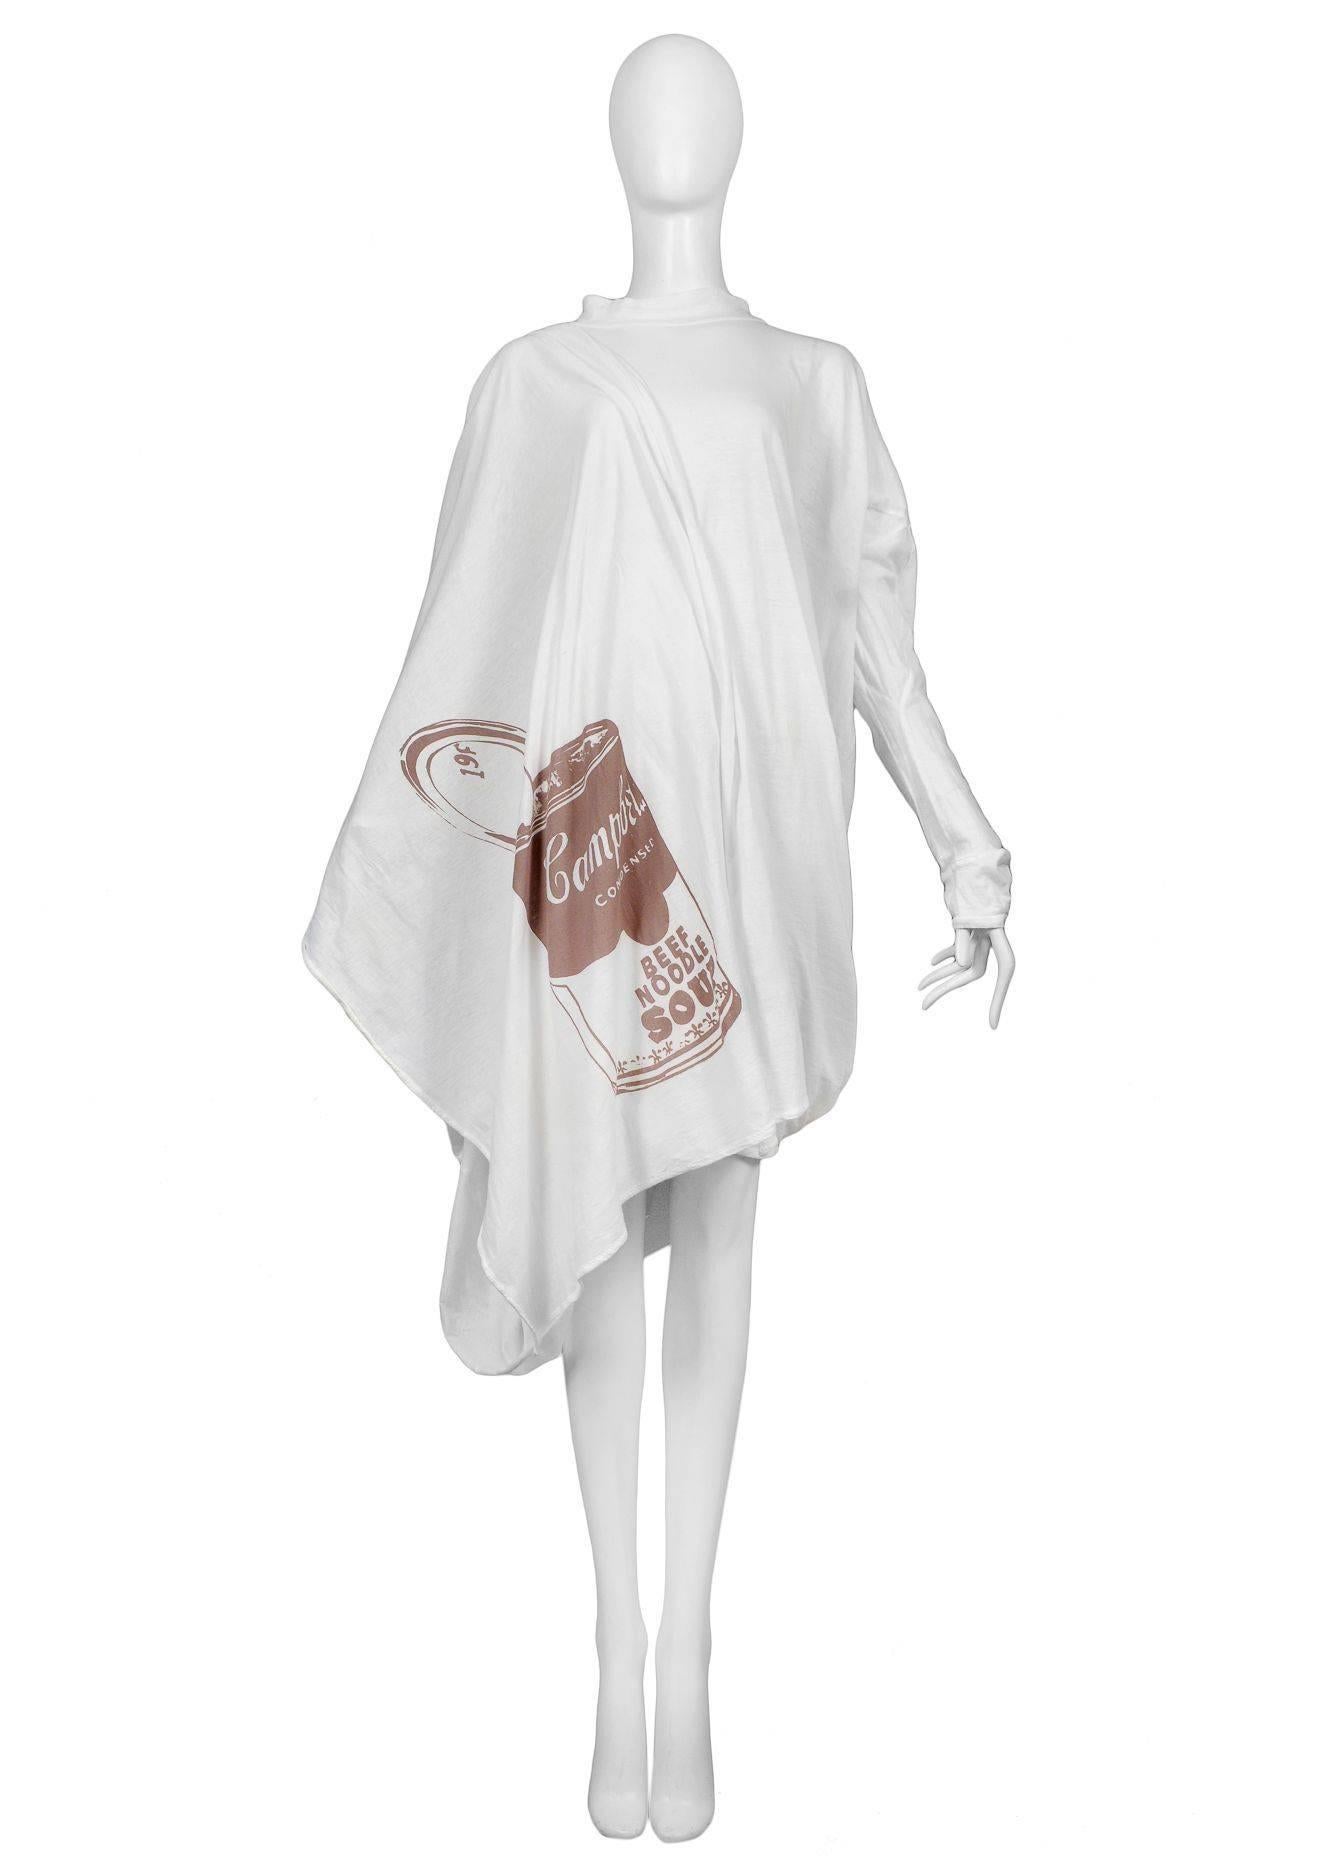 Vintage Vivienne Westwood and Malcolm McLaren World's End toga dress with Andy Warhol Campbell Soup print. Made of white cotton knit. One size. A 'Nostalgia of Mud' (Buffalo) Collection Autumn / Winter 1982-3.